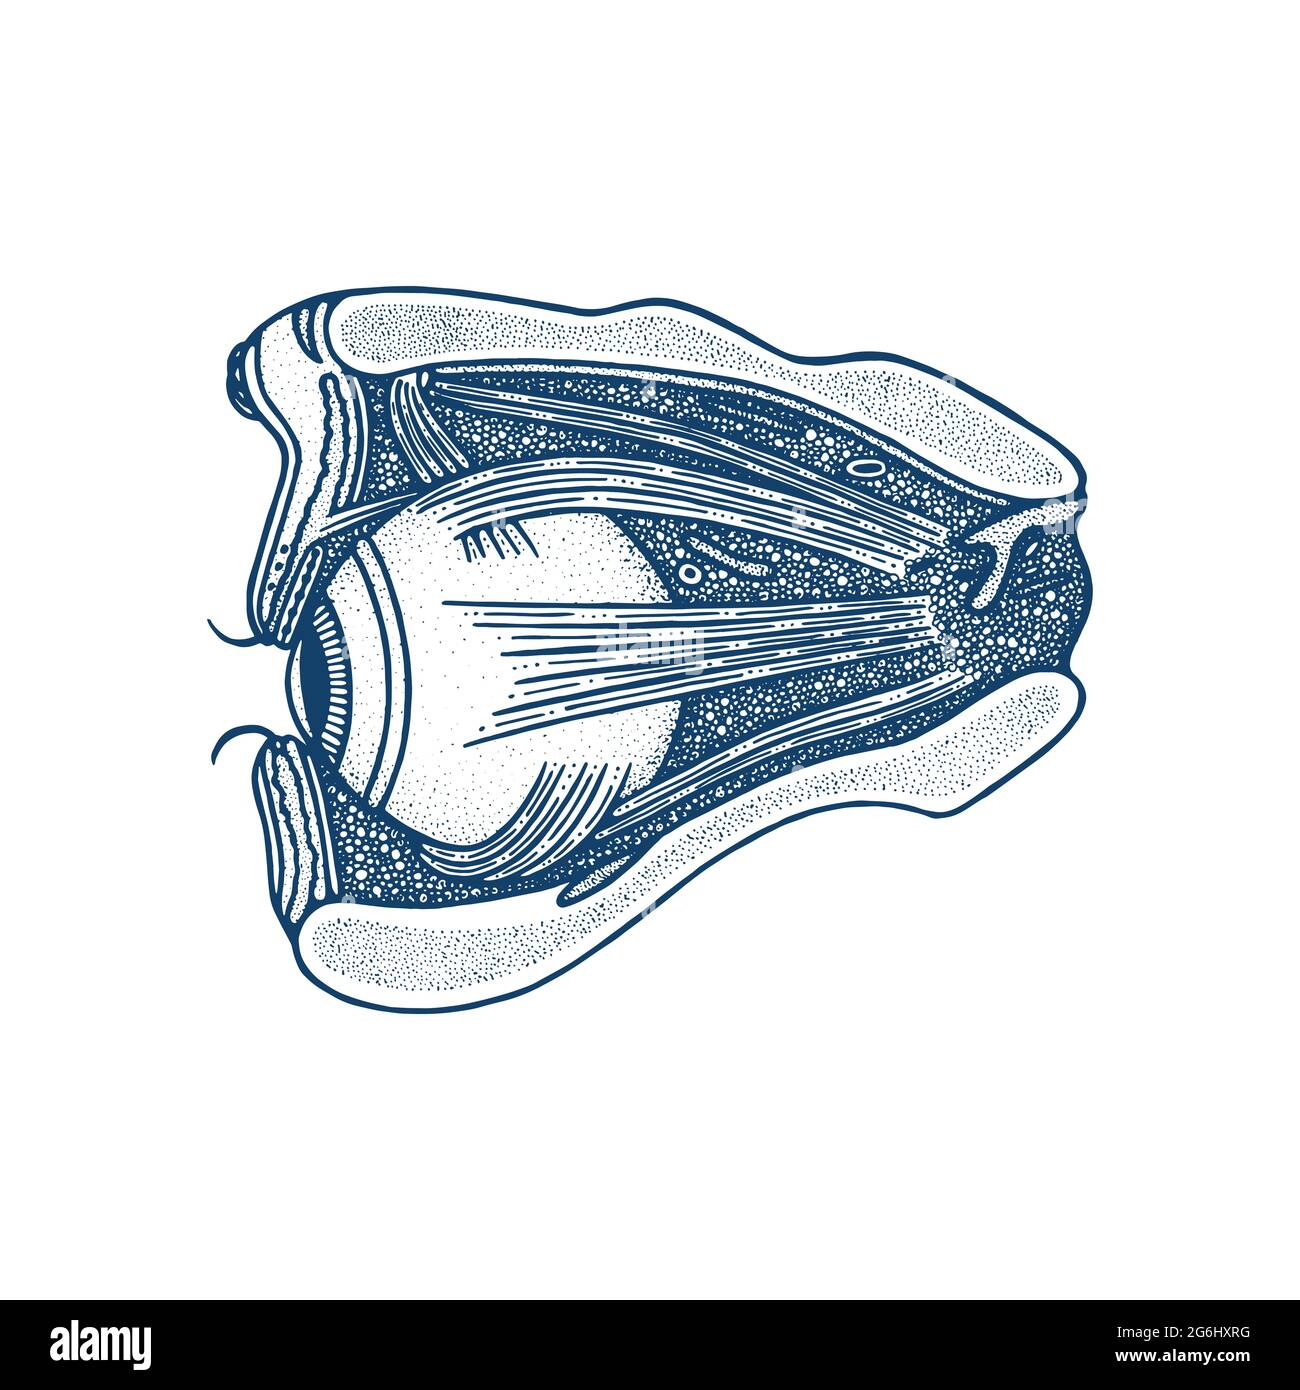 The human eye. Drawing by Karen Lefohn. Used with permission. | Download  Scientific Diagram